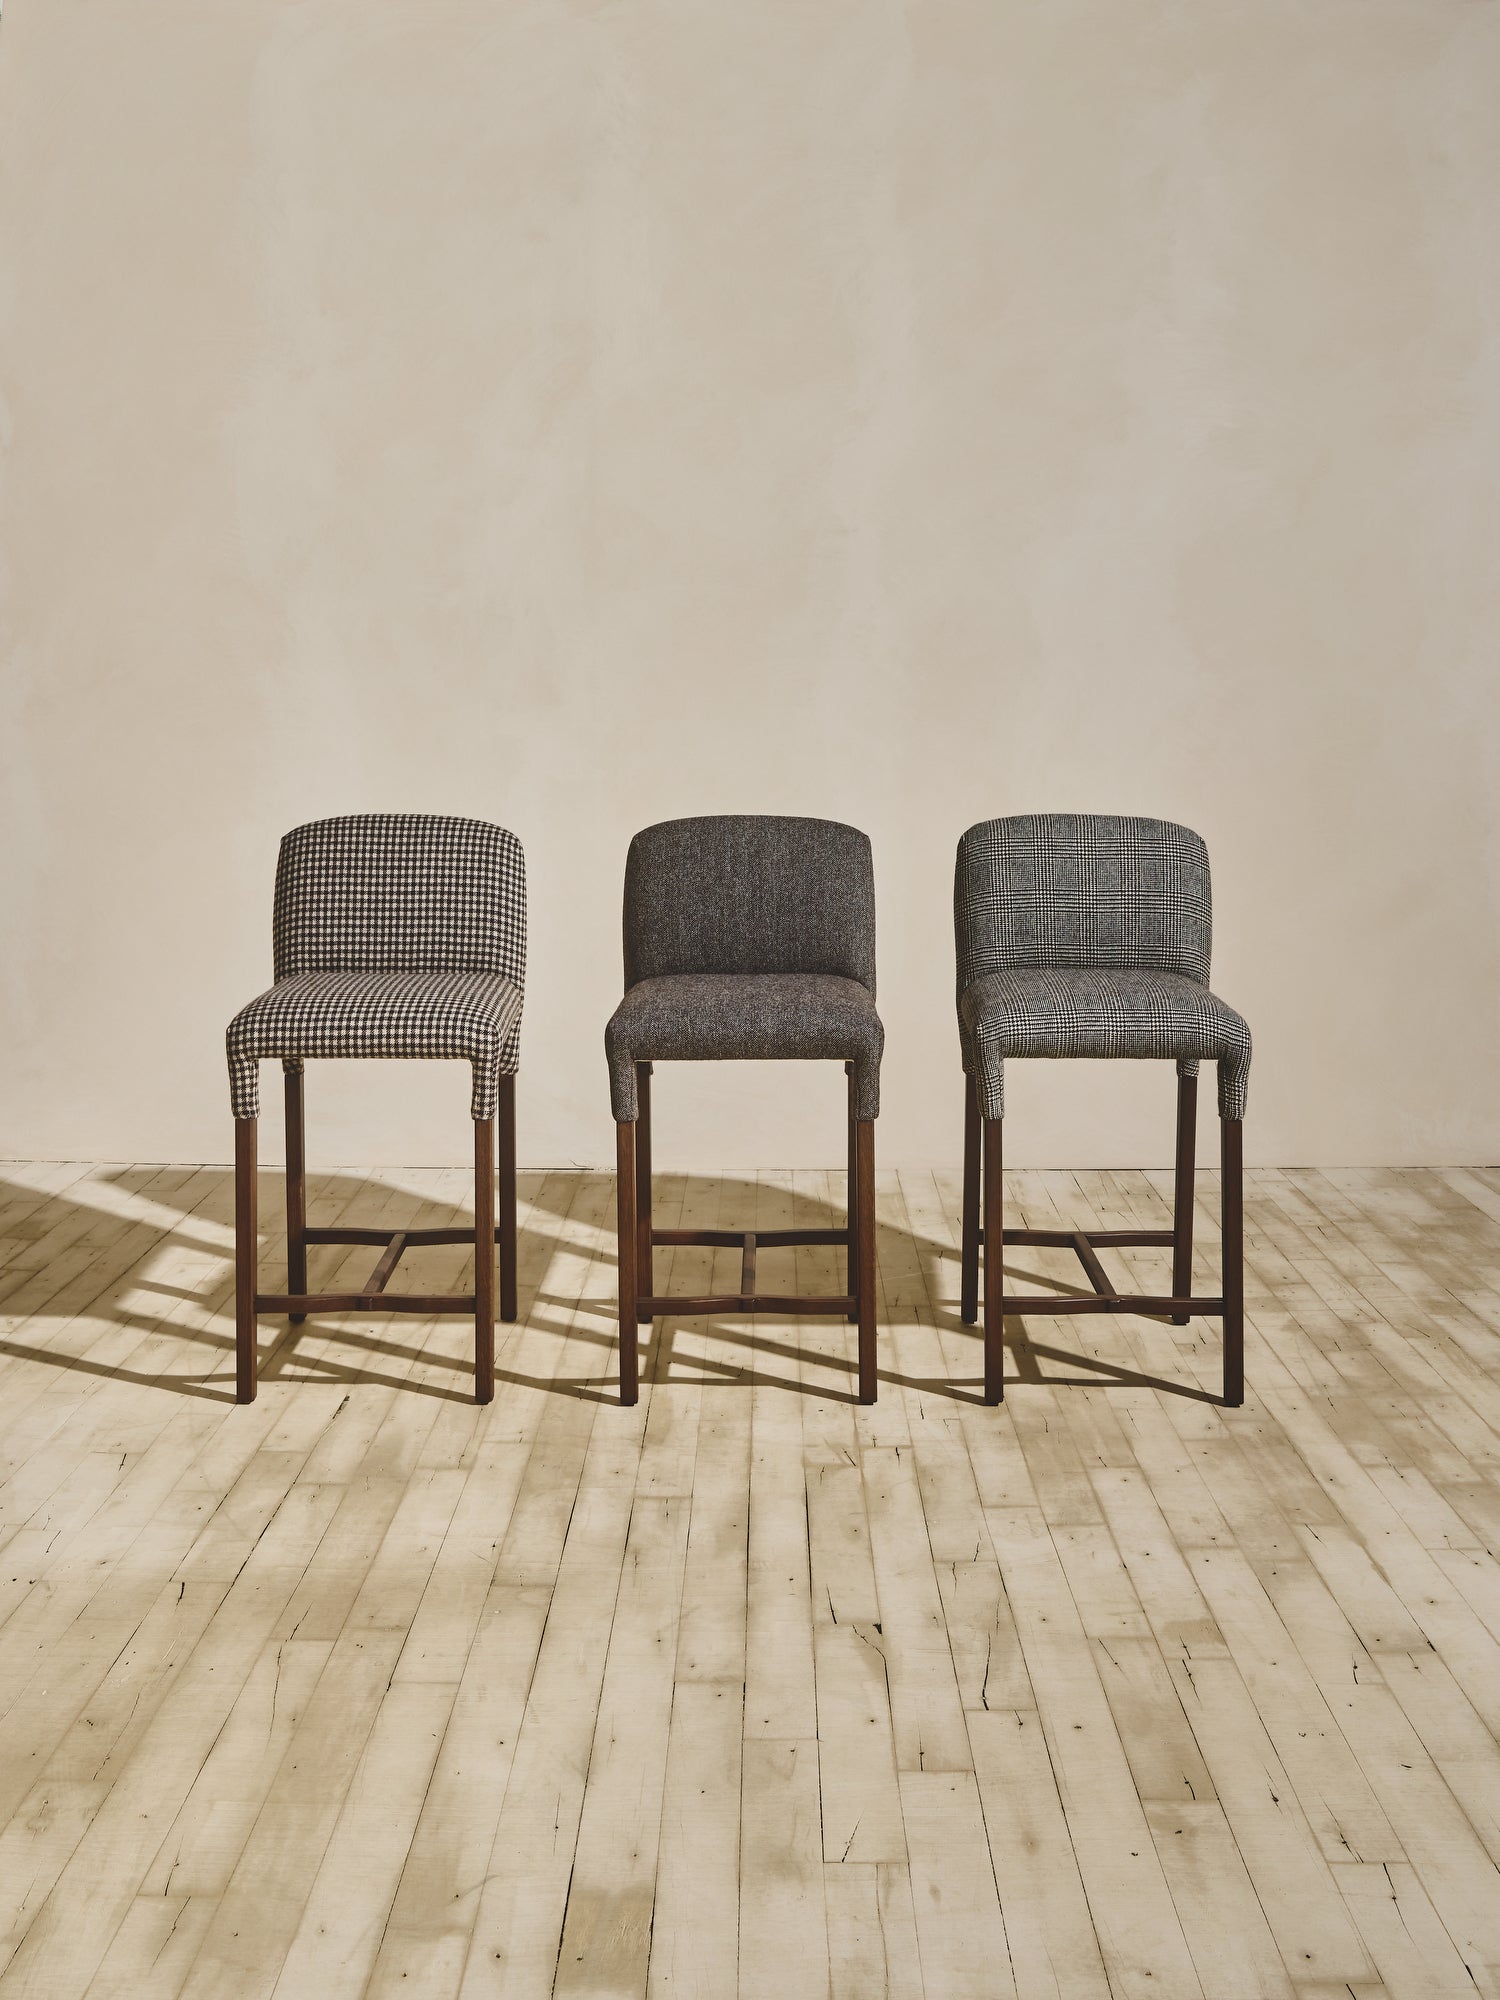 Group of heritage style Mr. Wolcott Counter Stool in natural finish and upholstered fabric seating.